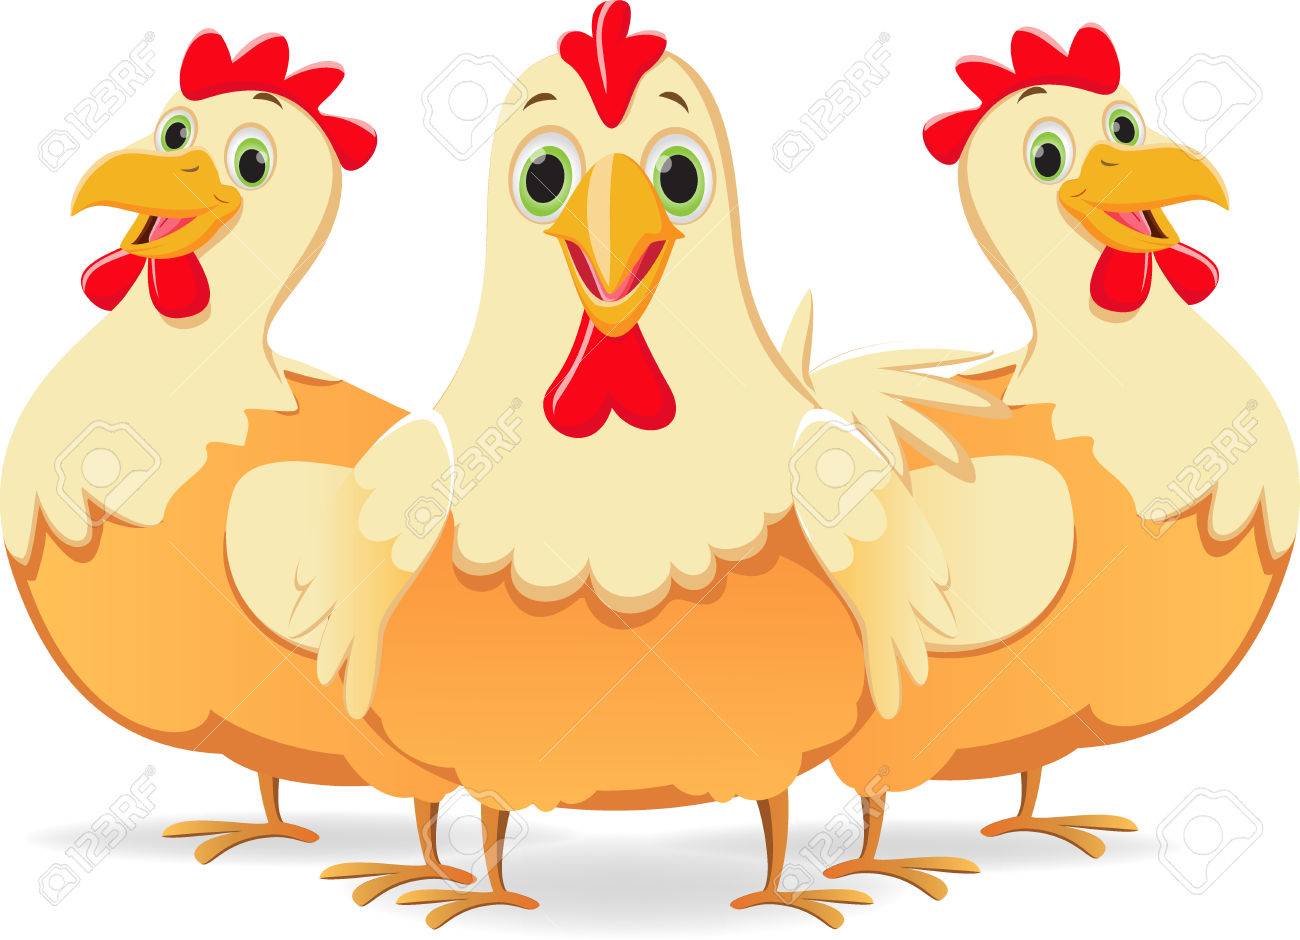 Chickens clipart. Three station 